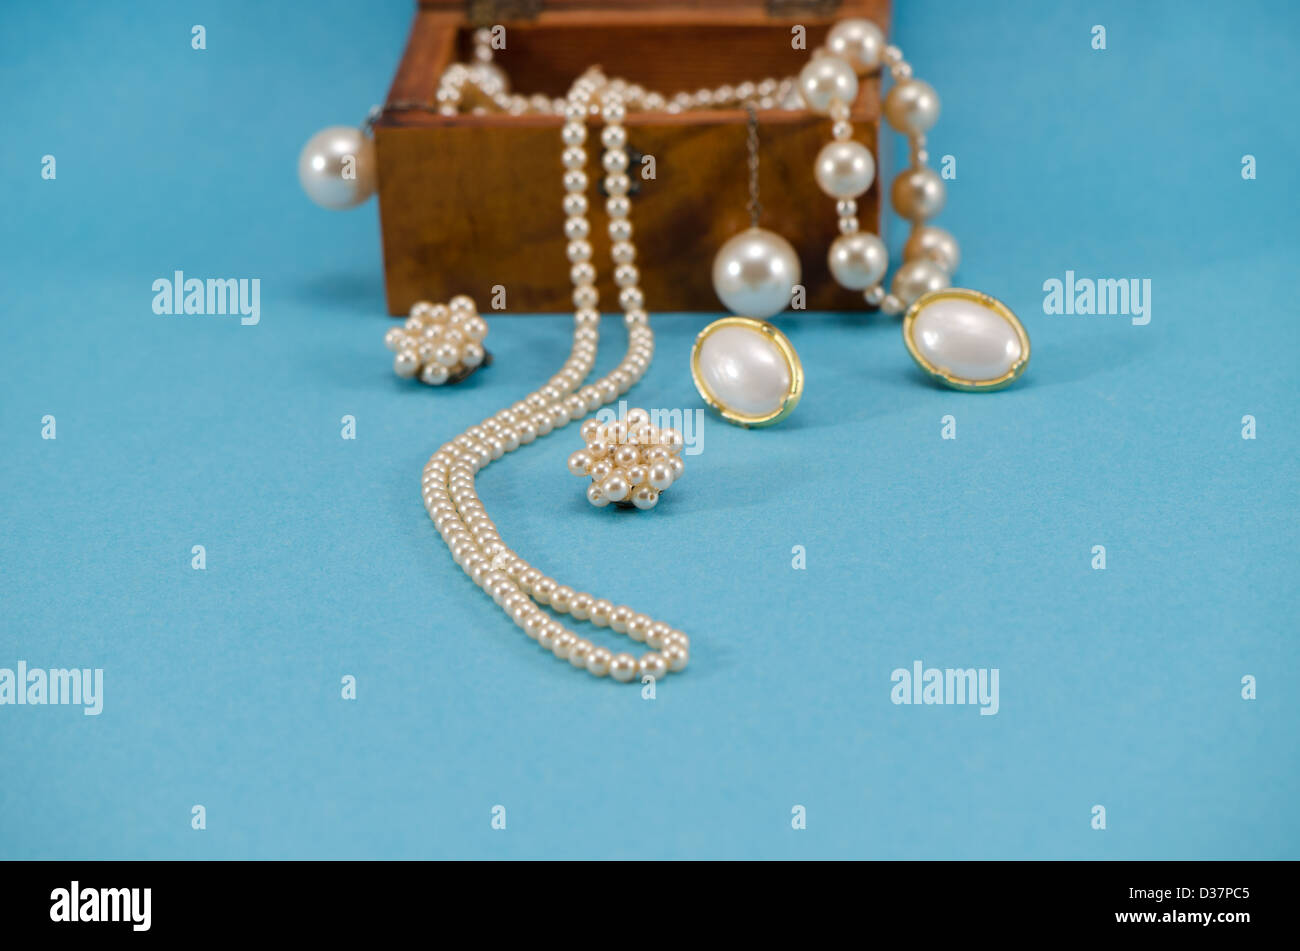 pearl jewelry beads necklace earring in retro wooden box on blue background. Stock Photo